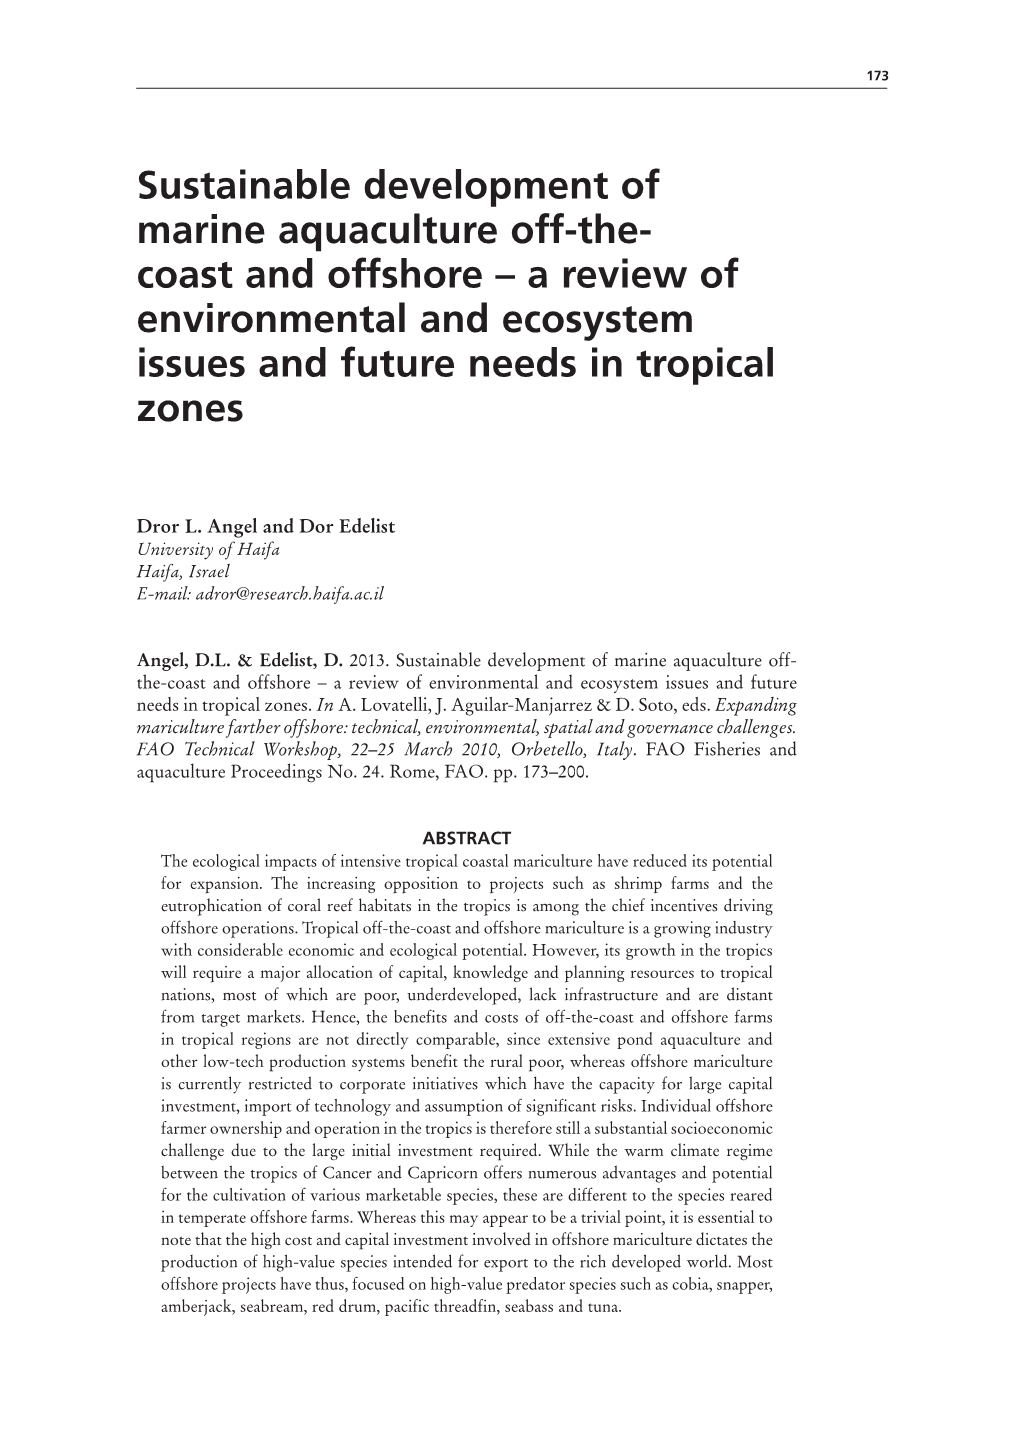 Sustainable Development of Marine Aquaculture Off-The- Coast and Offshore – a Review of Environmental and Ecosystem Issues and Future Needs in Tropical Zones